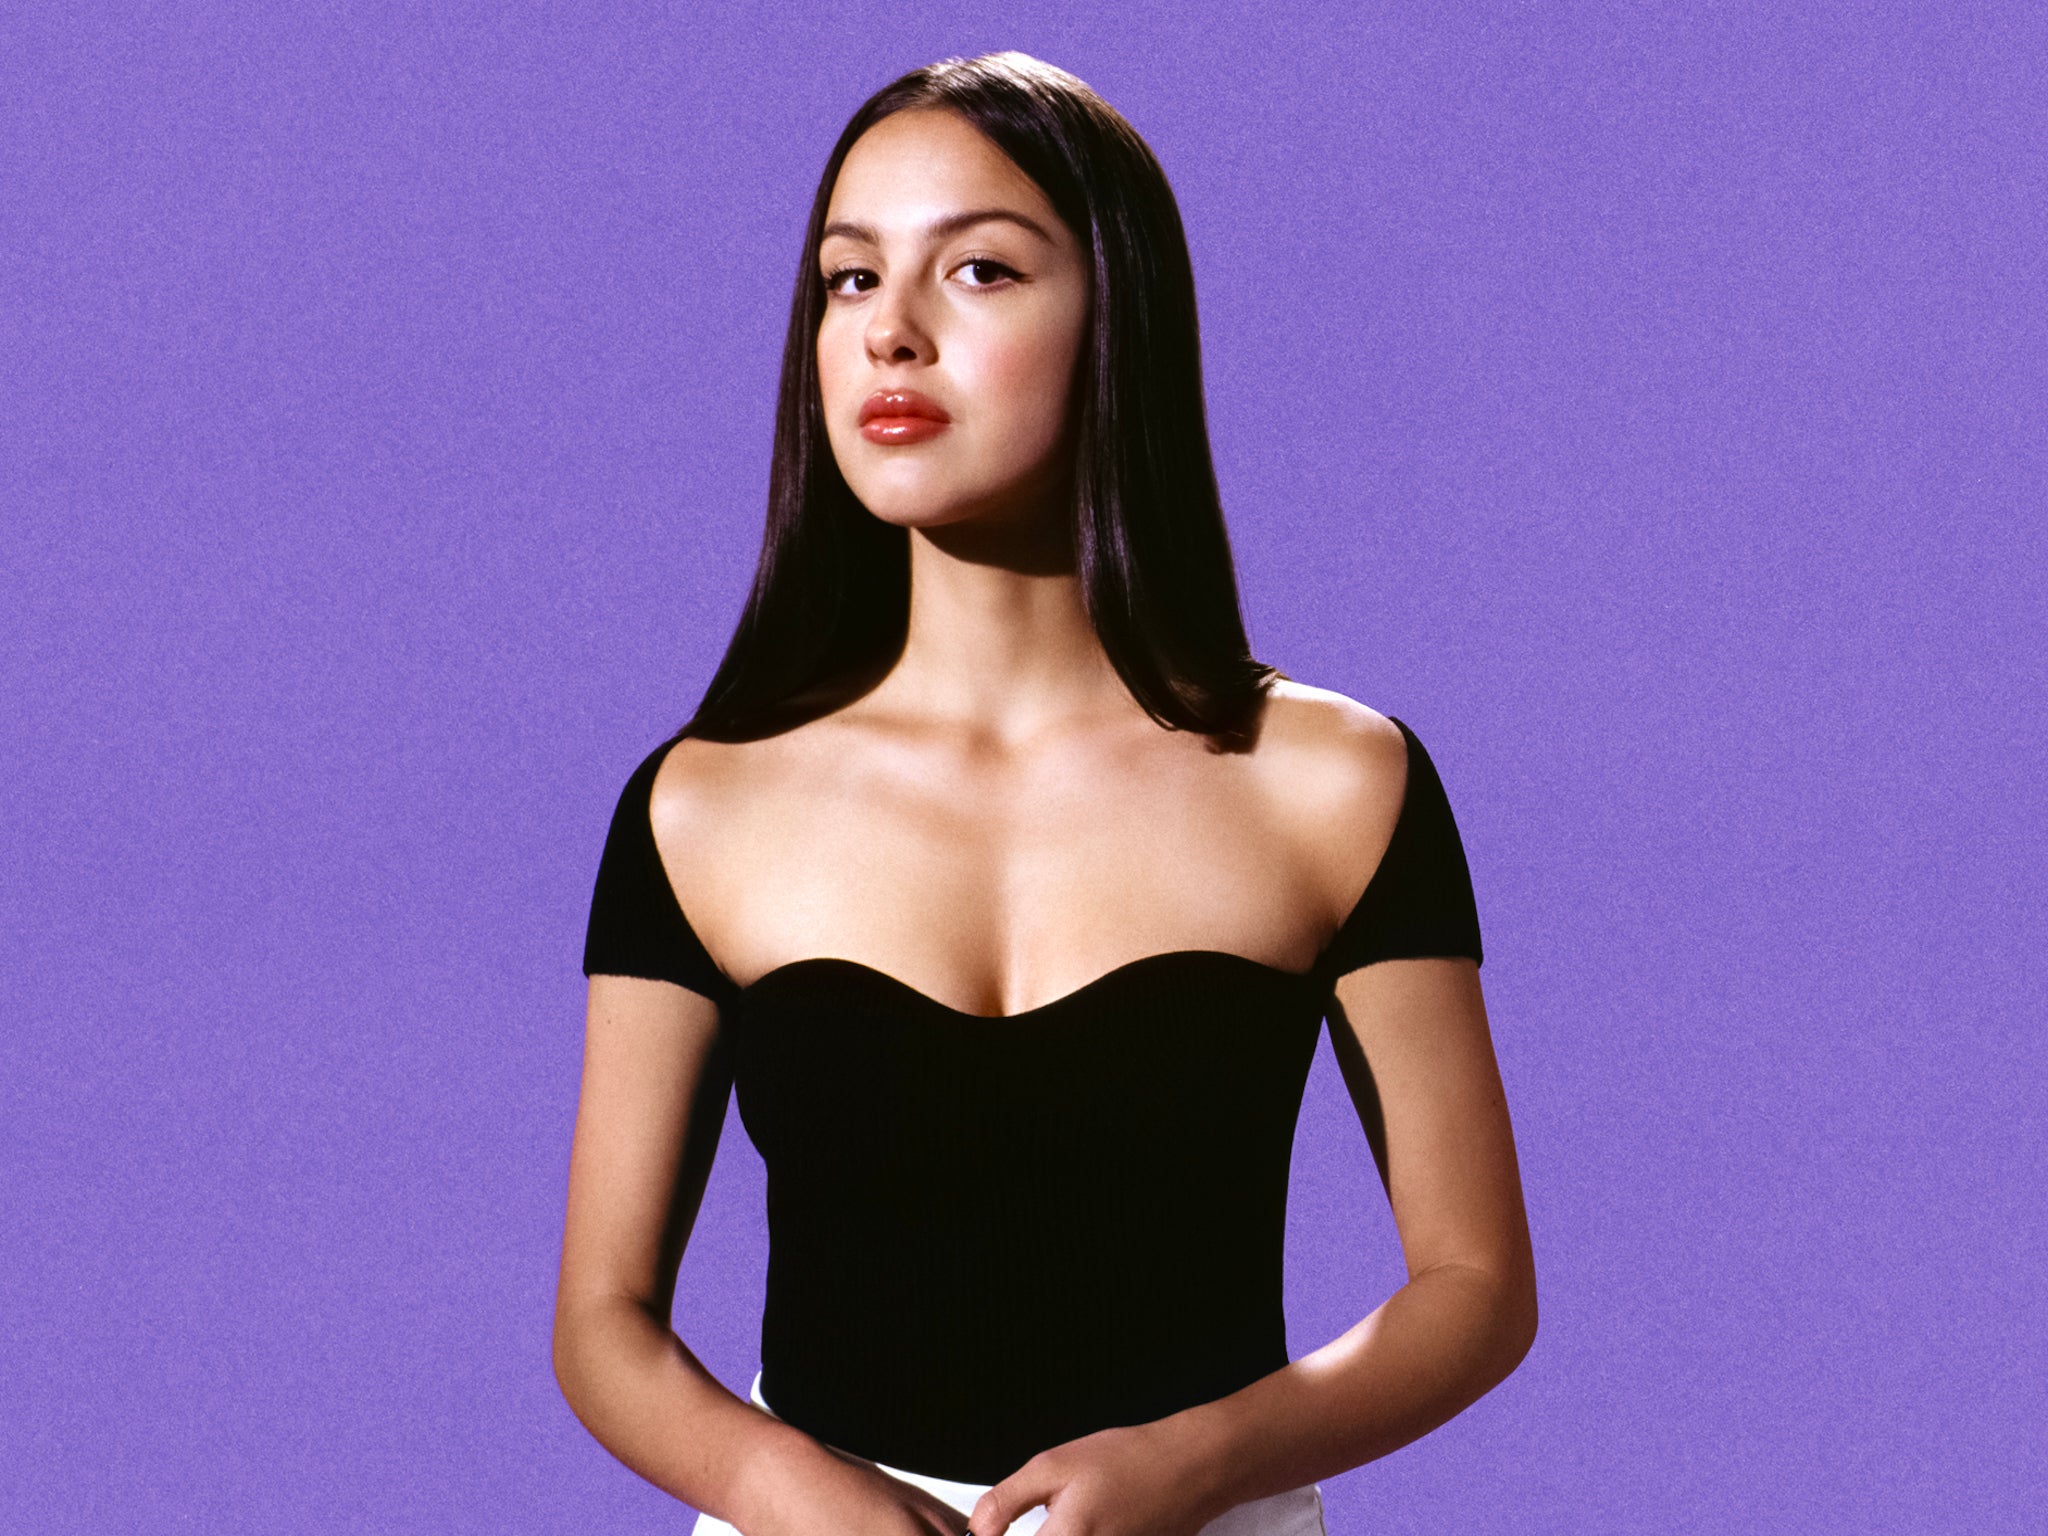 At 18, Olivia Rodrigo is the youngest person to debut atop the US Billboard 100 chart